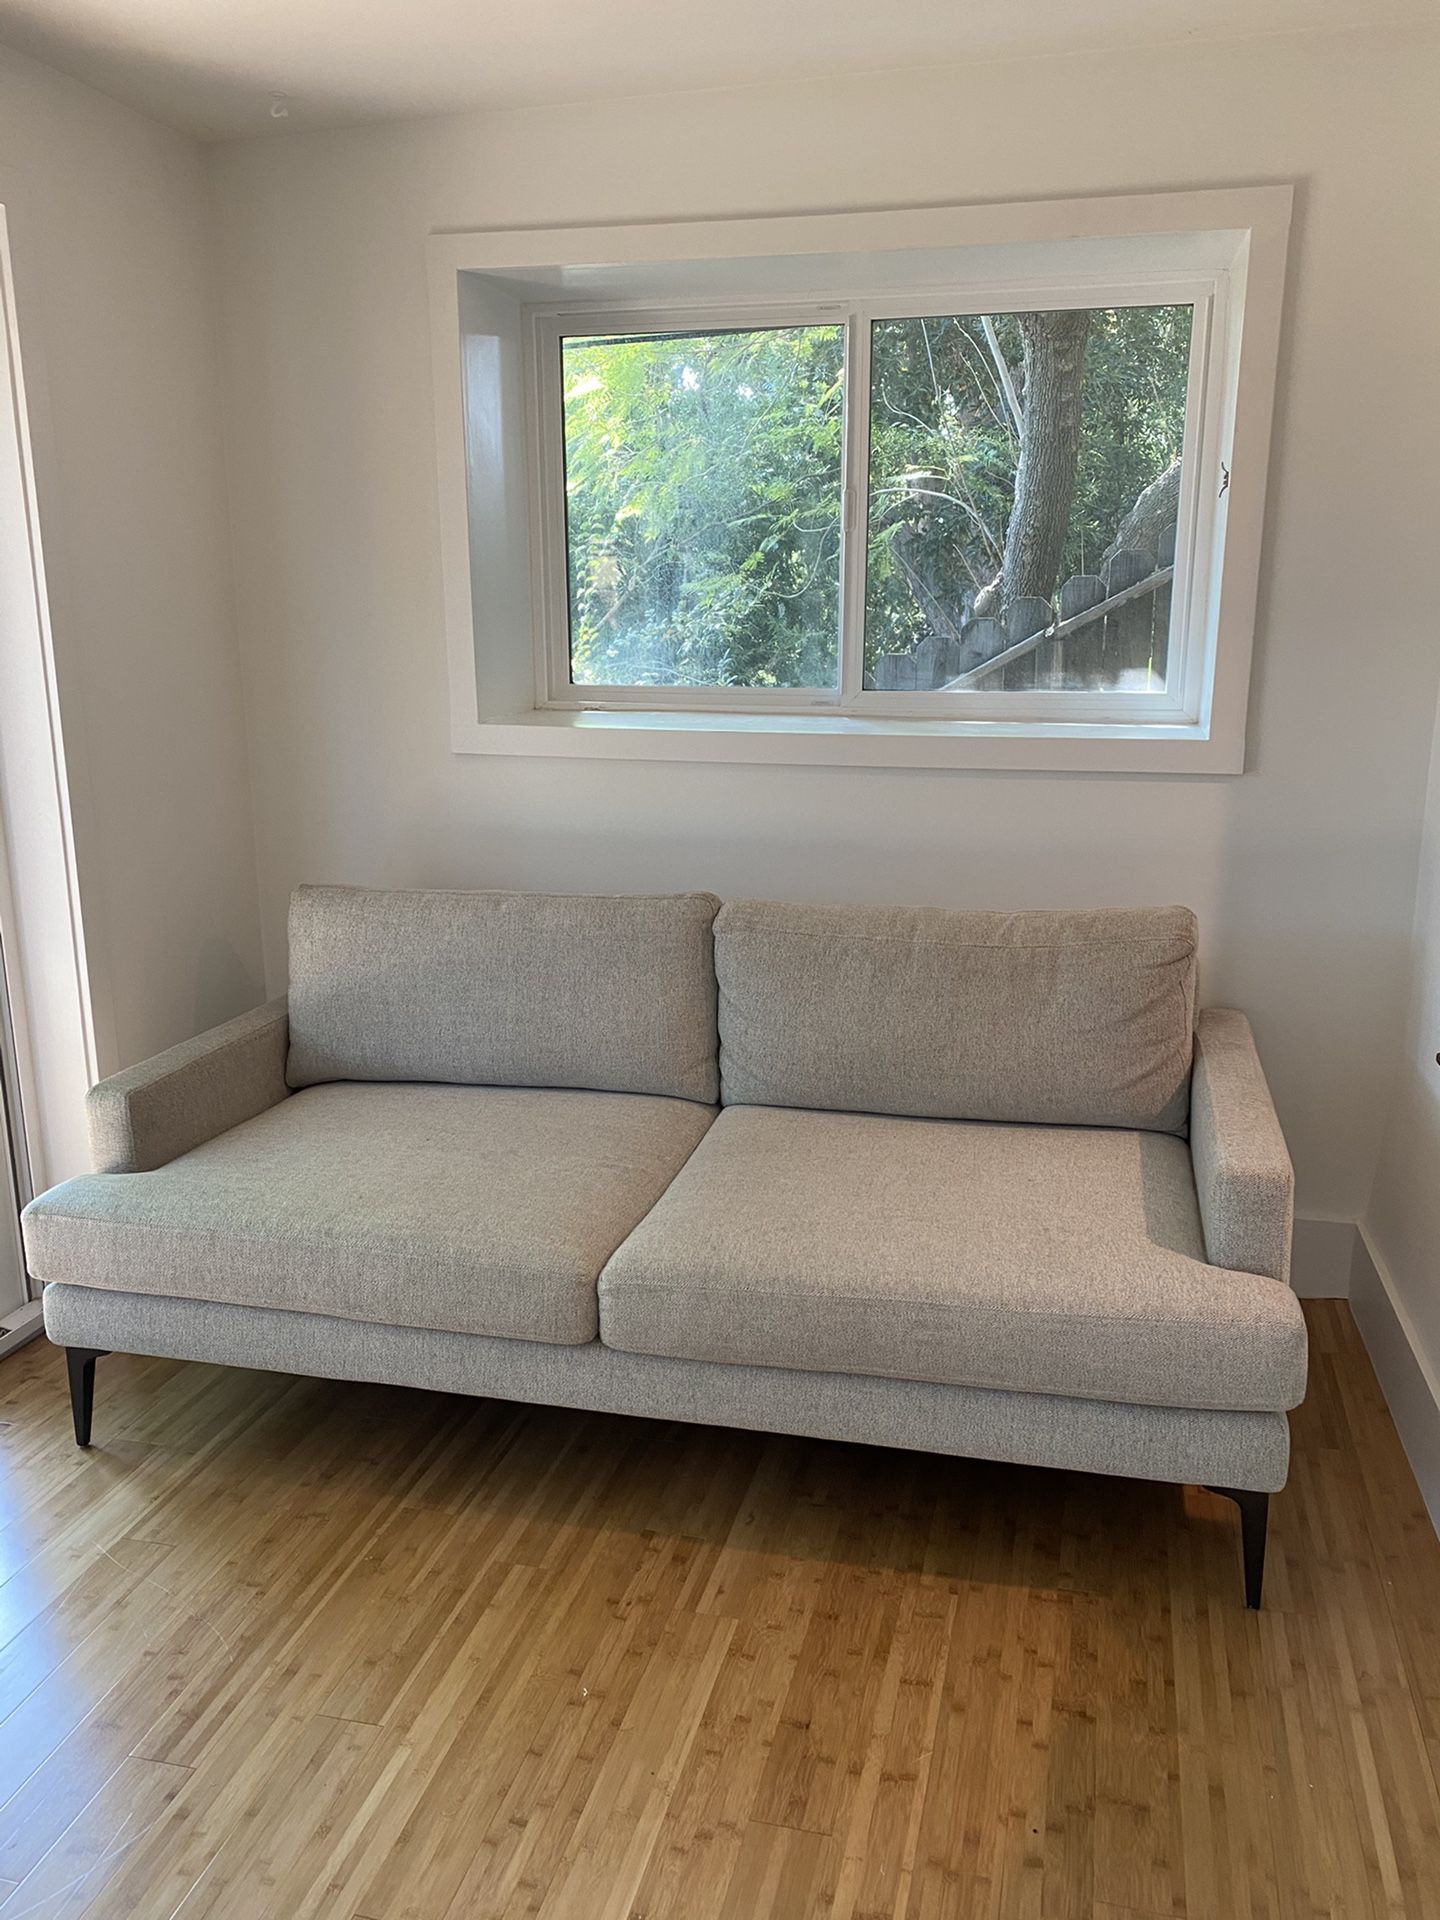 West Elm Andes Sofa - grey couch